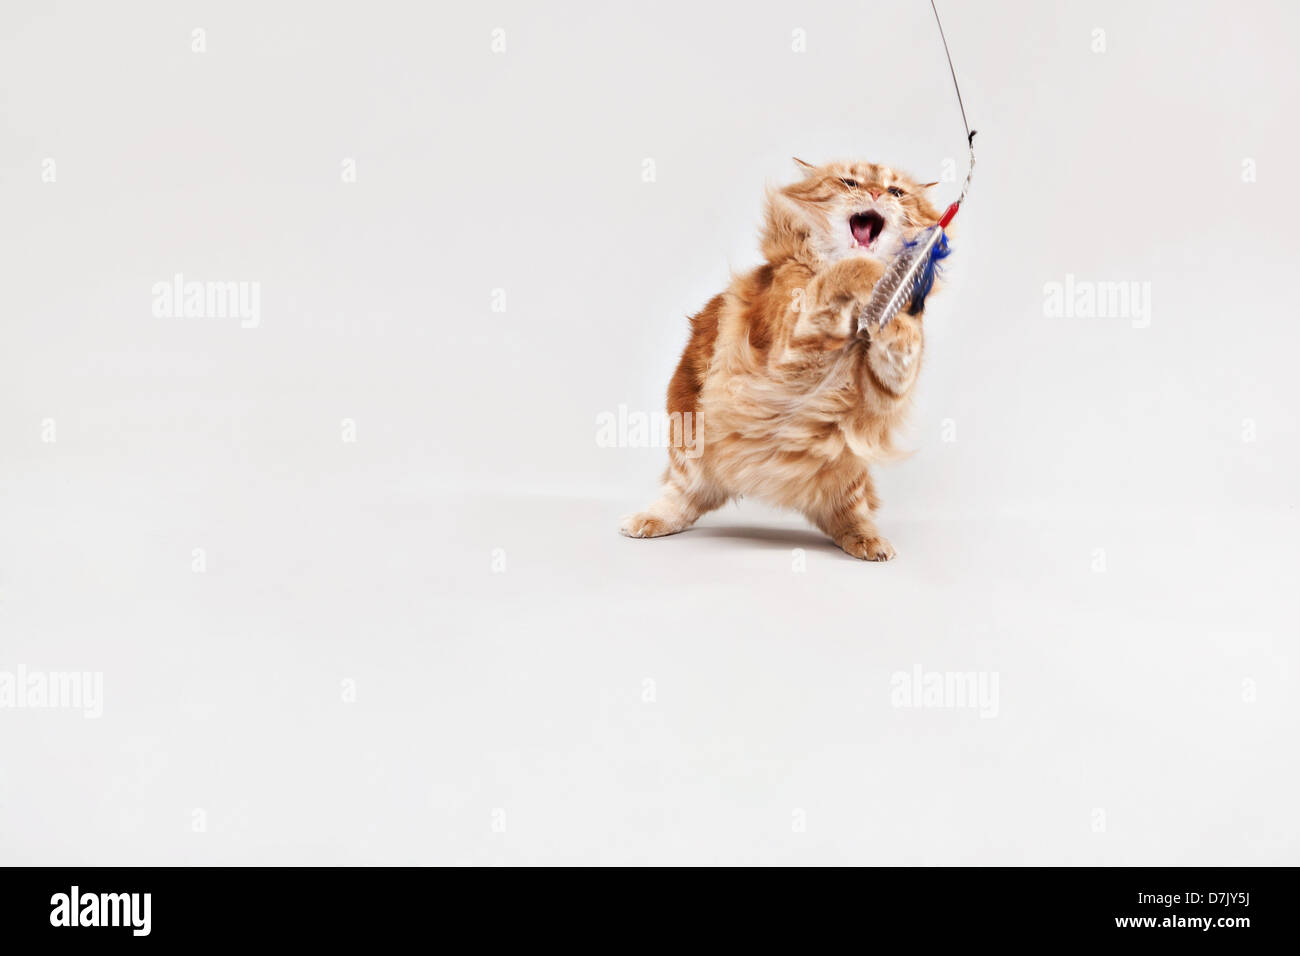 Animated cat playing with toy against white background Stock Photo